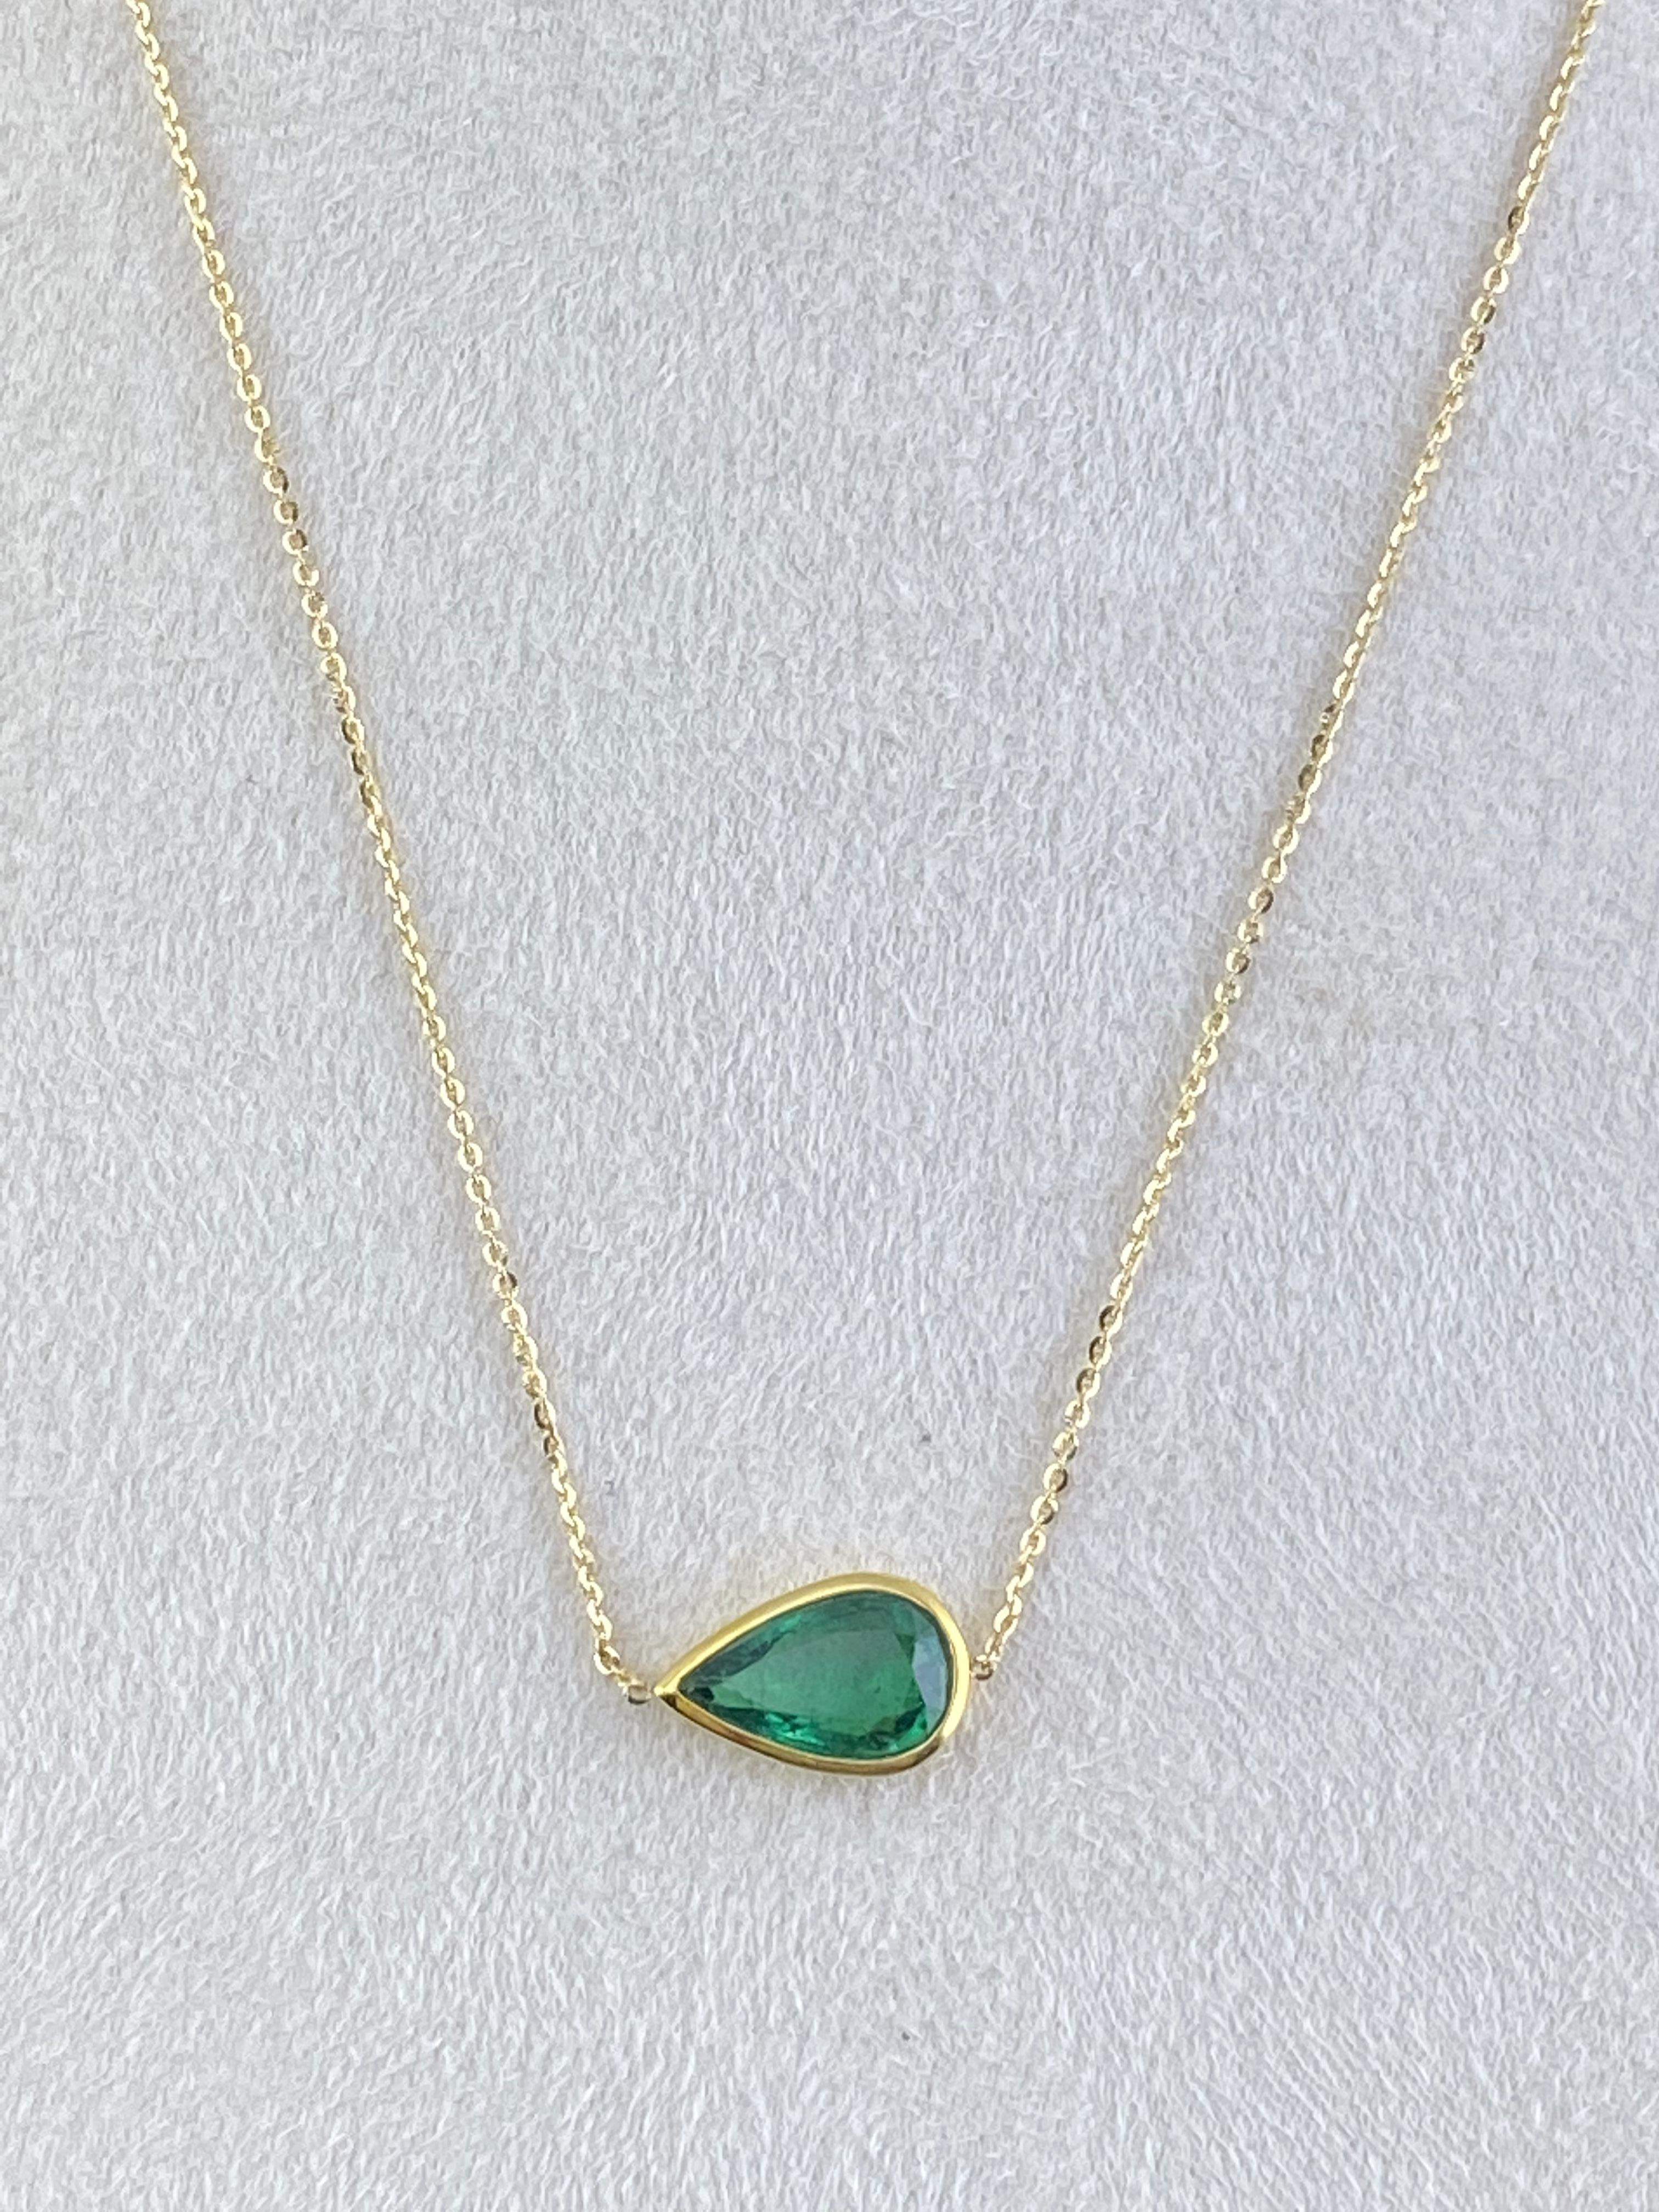 Modern Certified 1.65 Carat Pear Shape Emerald Pendant Chain Necklace For Sale